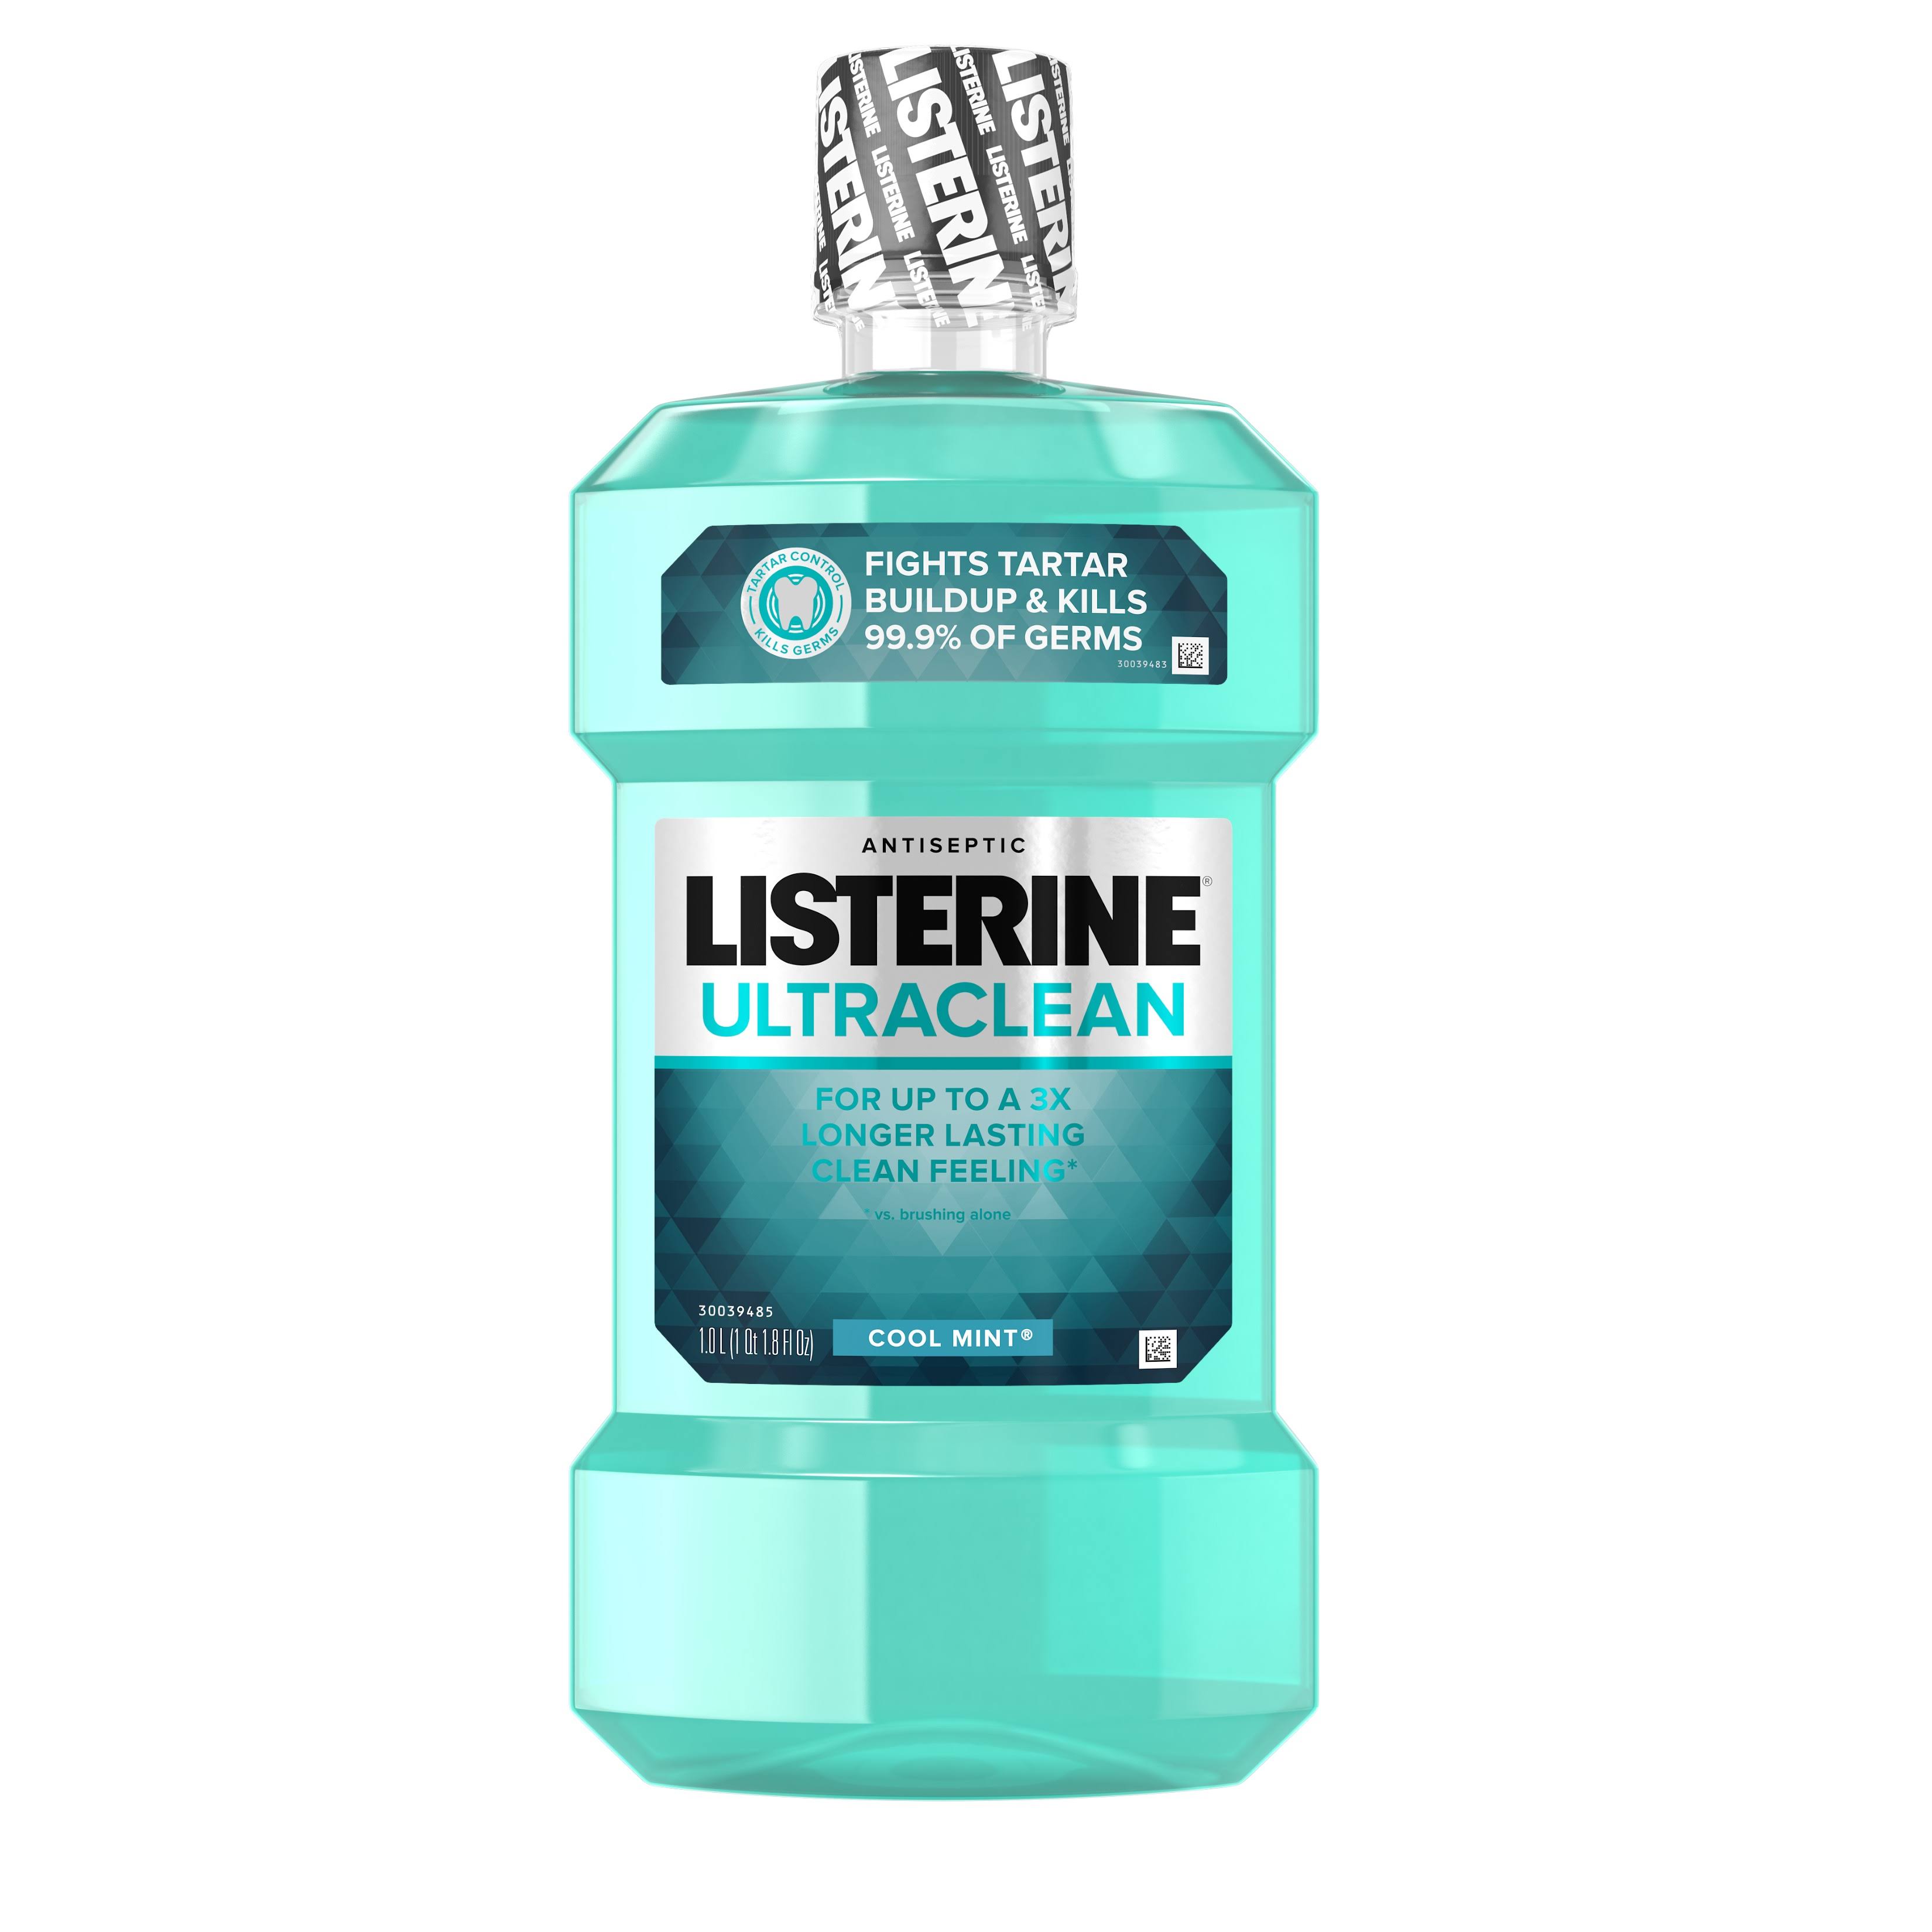 Listerine Ultra Clean Antiseptic Mouthwash - Cool Mint, 1l